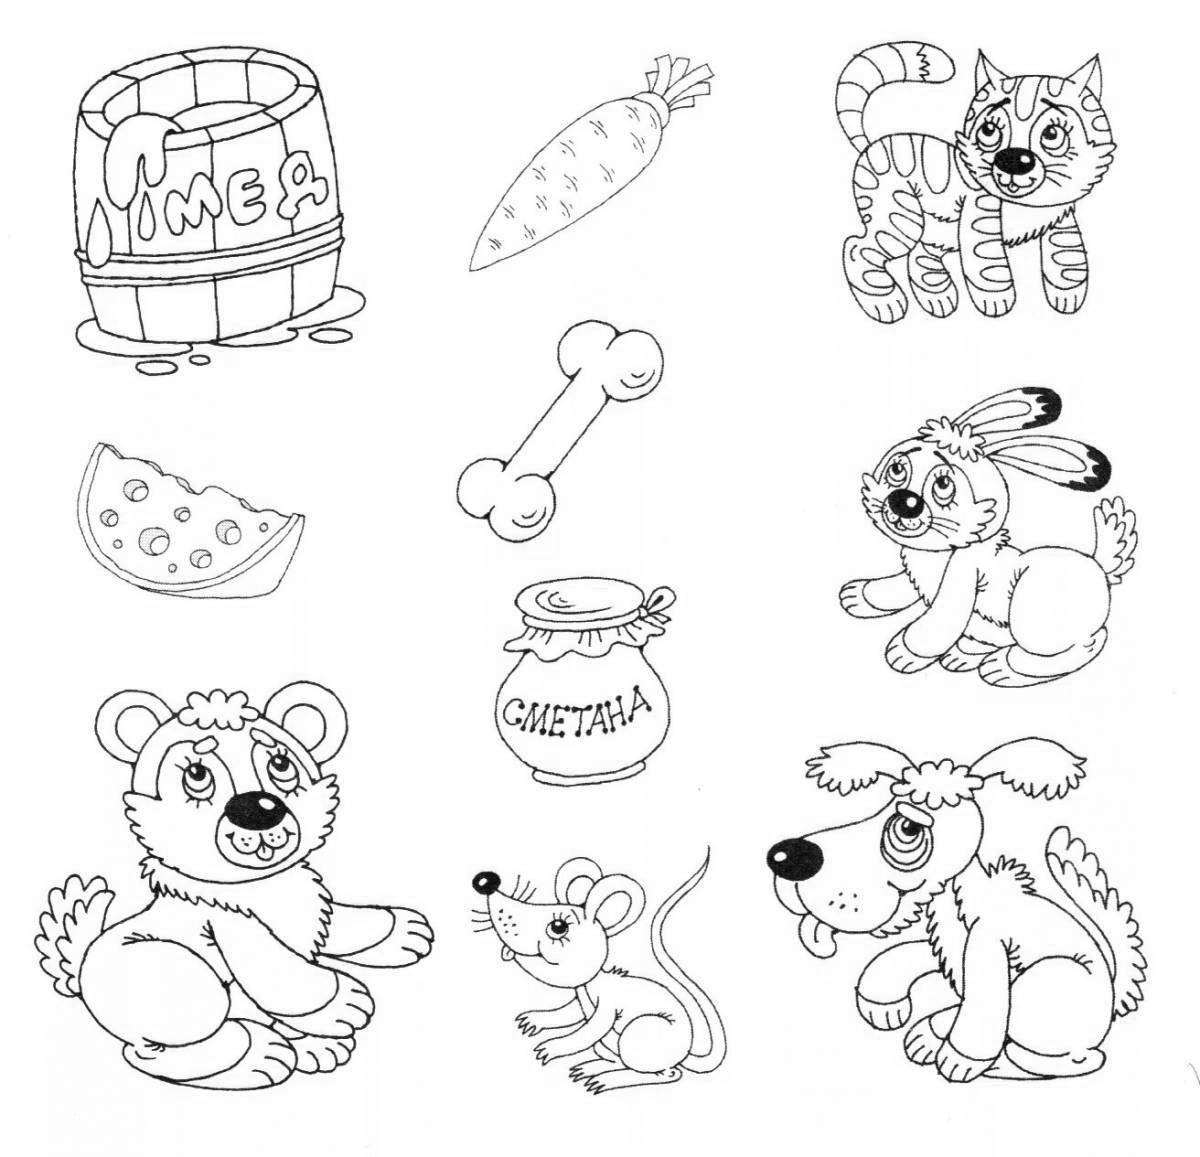 Incredible coloring book for 2 year olds